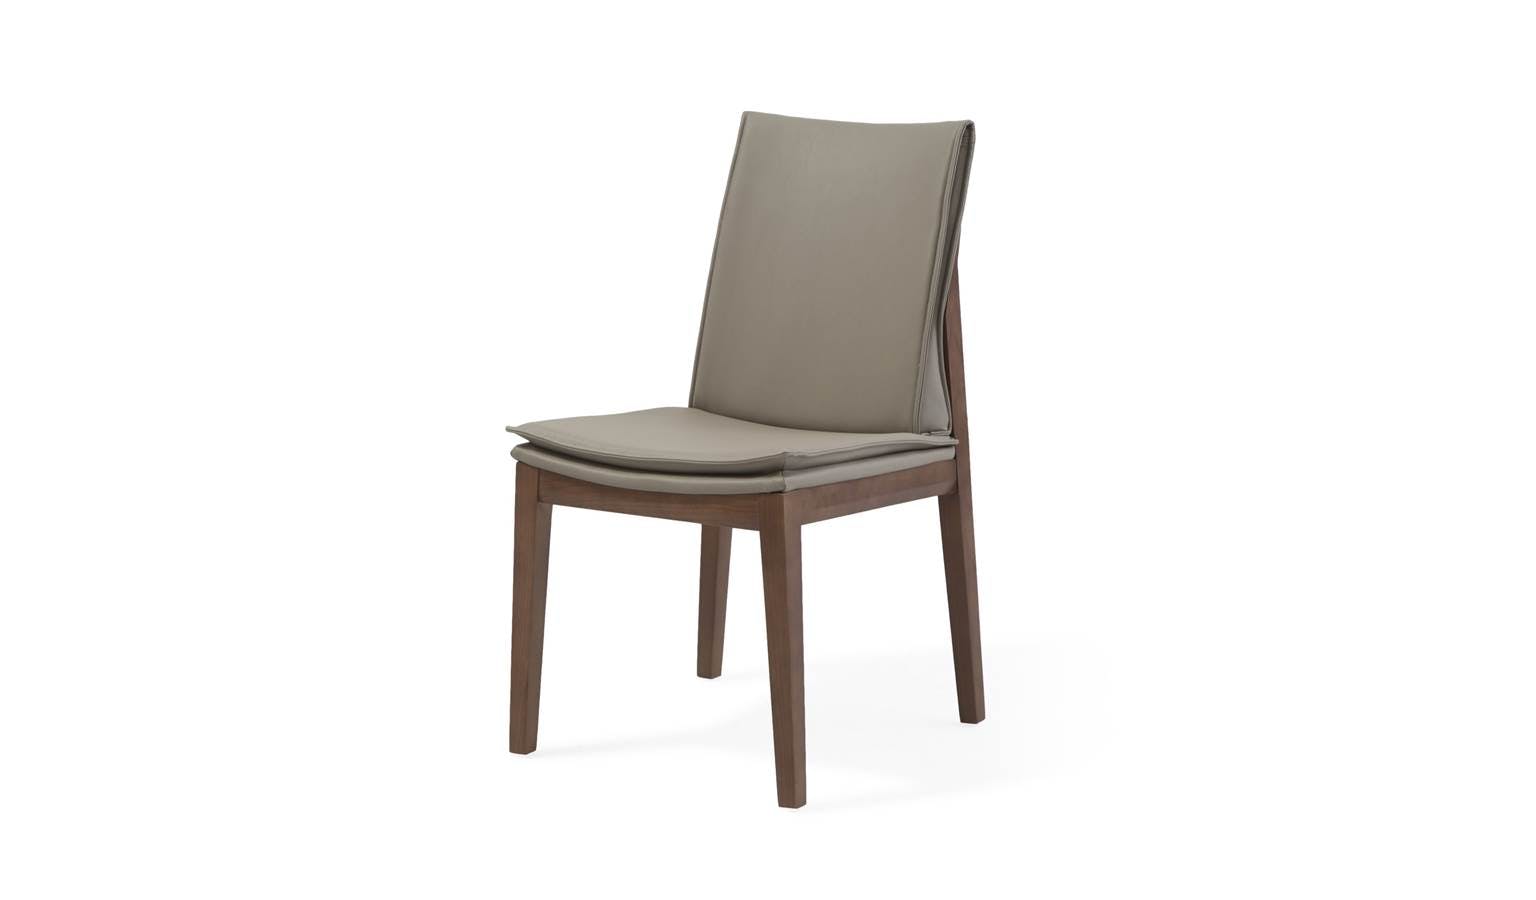 Hacienda Style Dimple Wood Dining Room Chairs